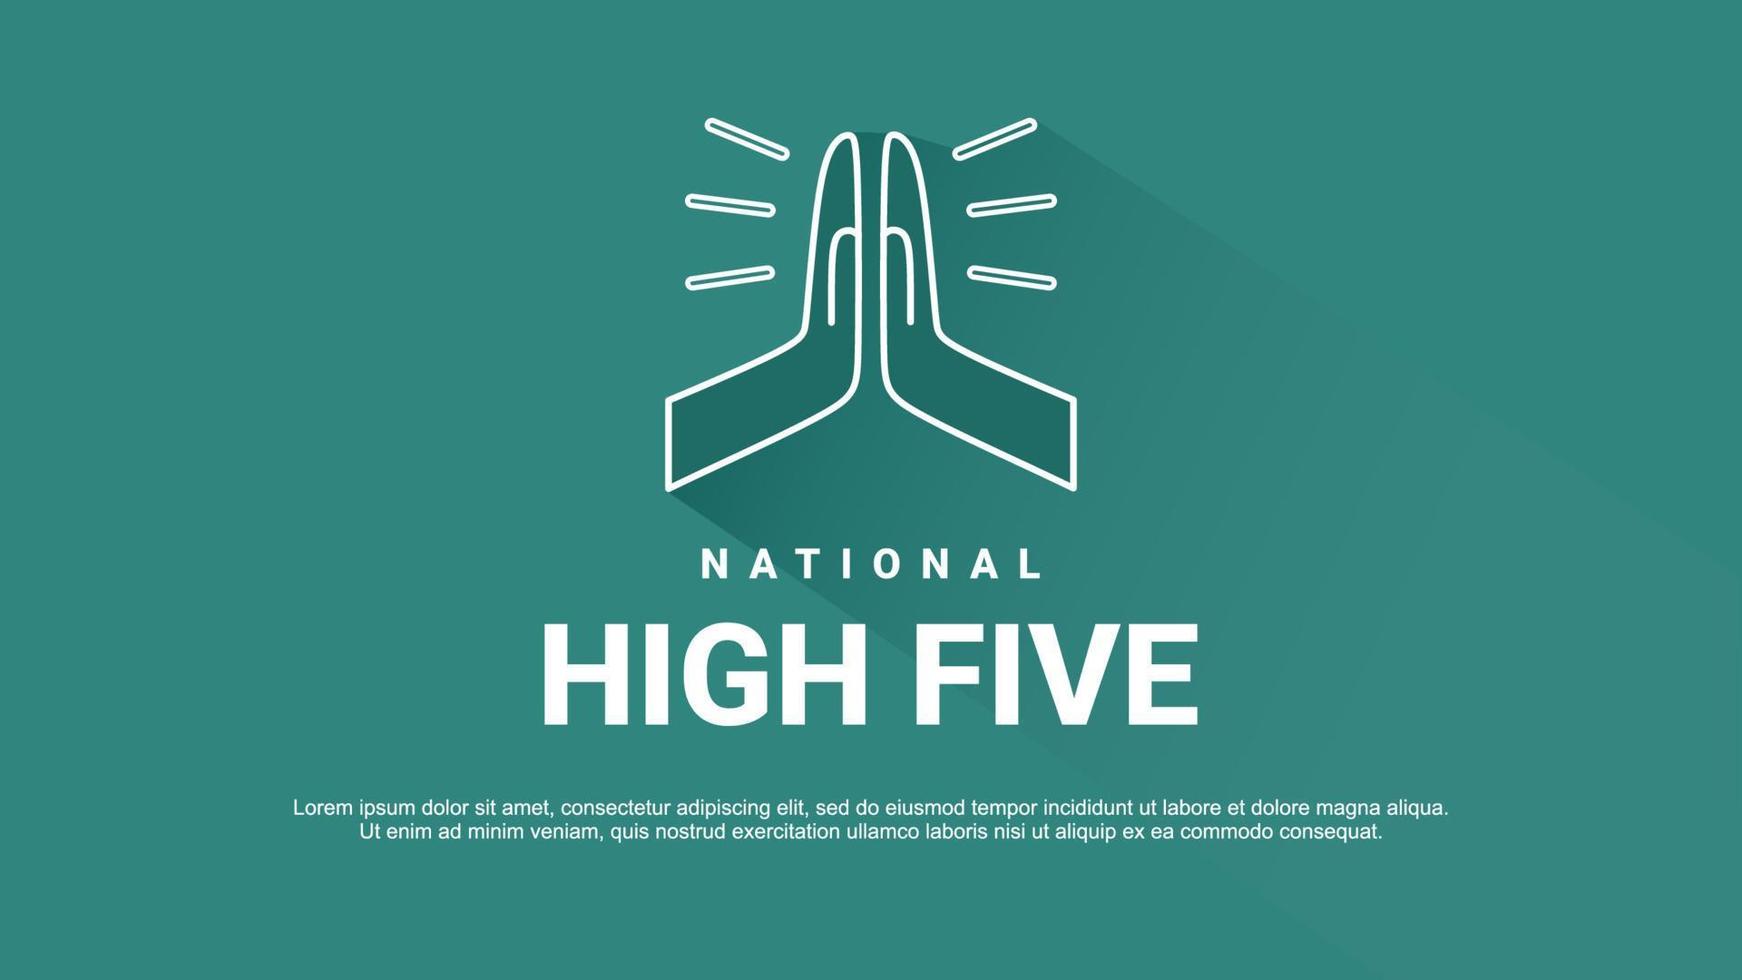 National high five day banner poster celebrated on april 21. vector